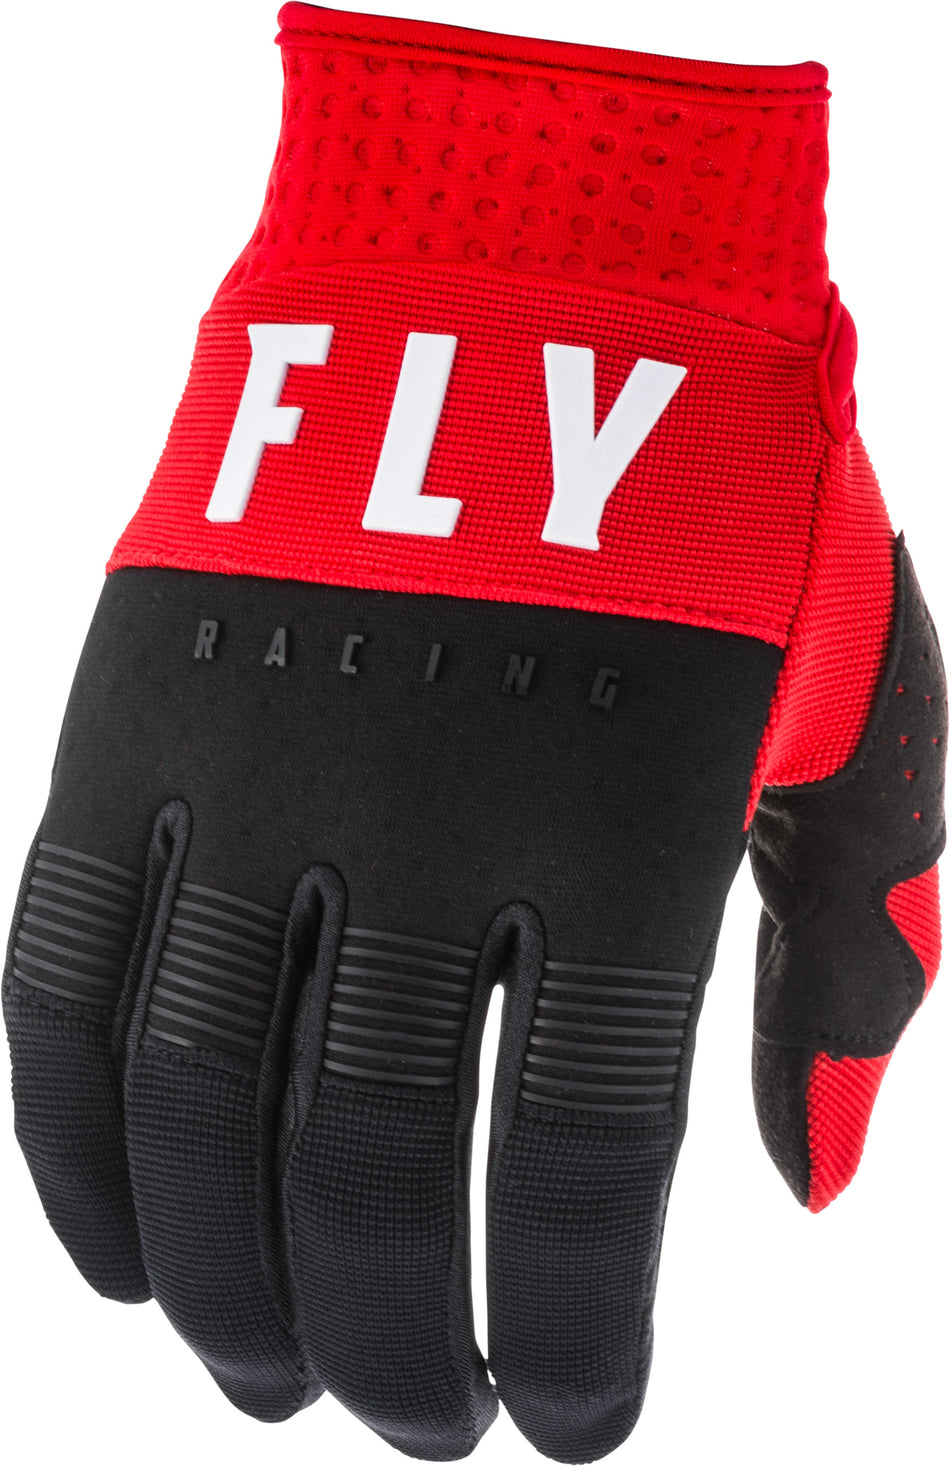 FLY RACING F-16 Gloves Red/Black/White Sz 09 373-91309